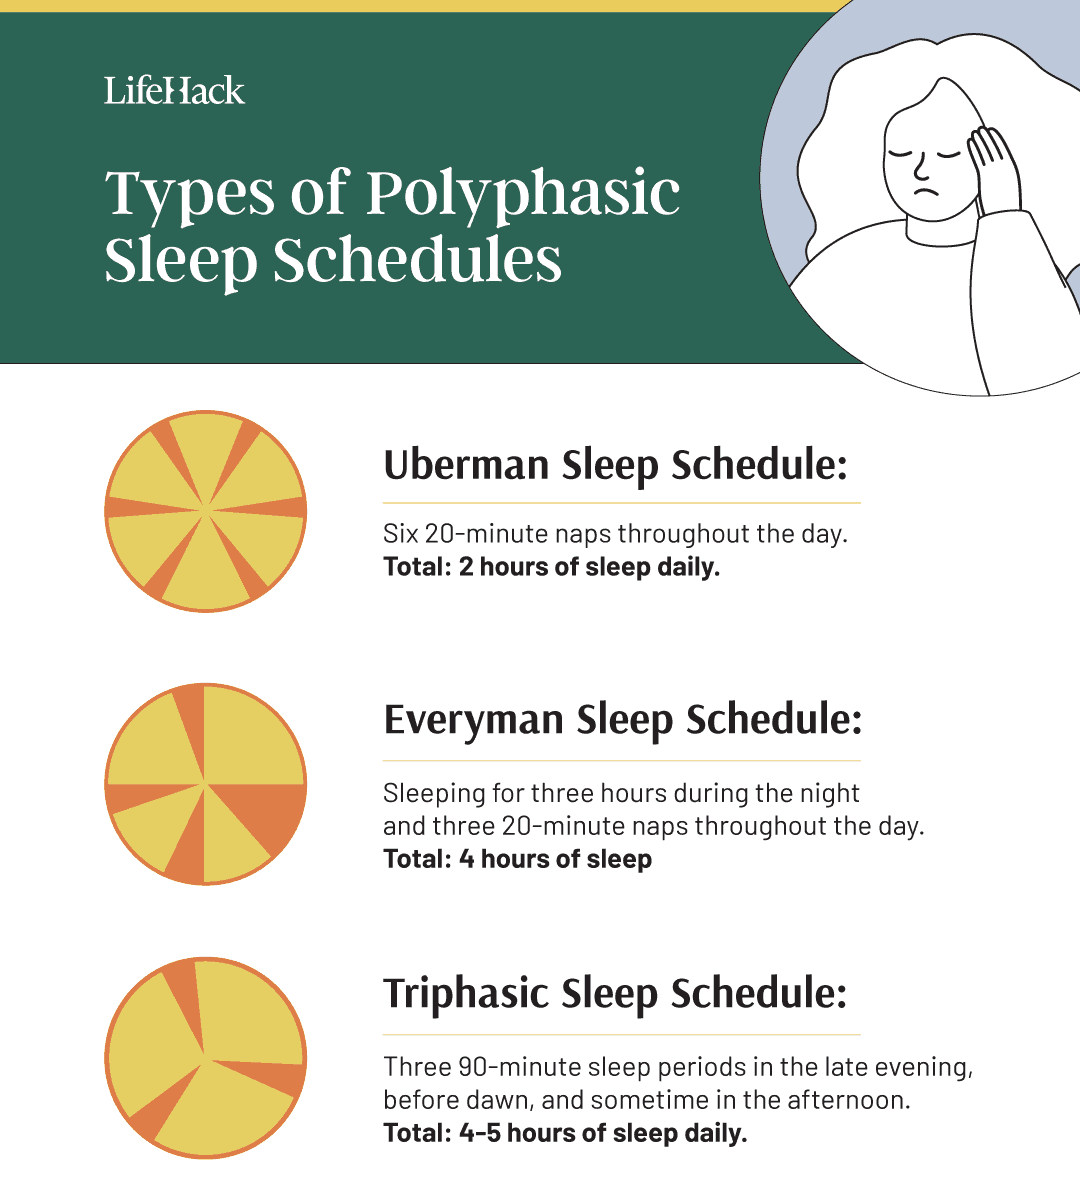 Types-of-Polyphasic-Sleep-Schedules